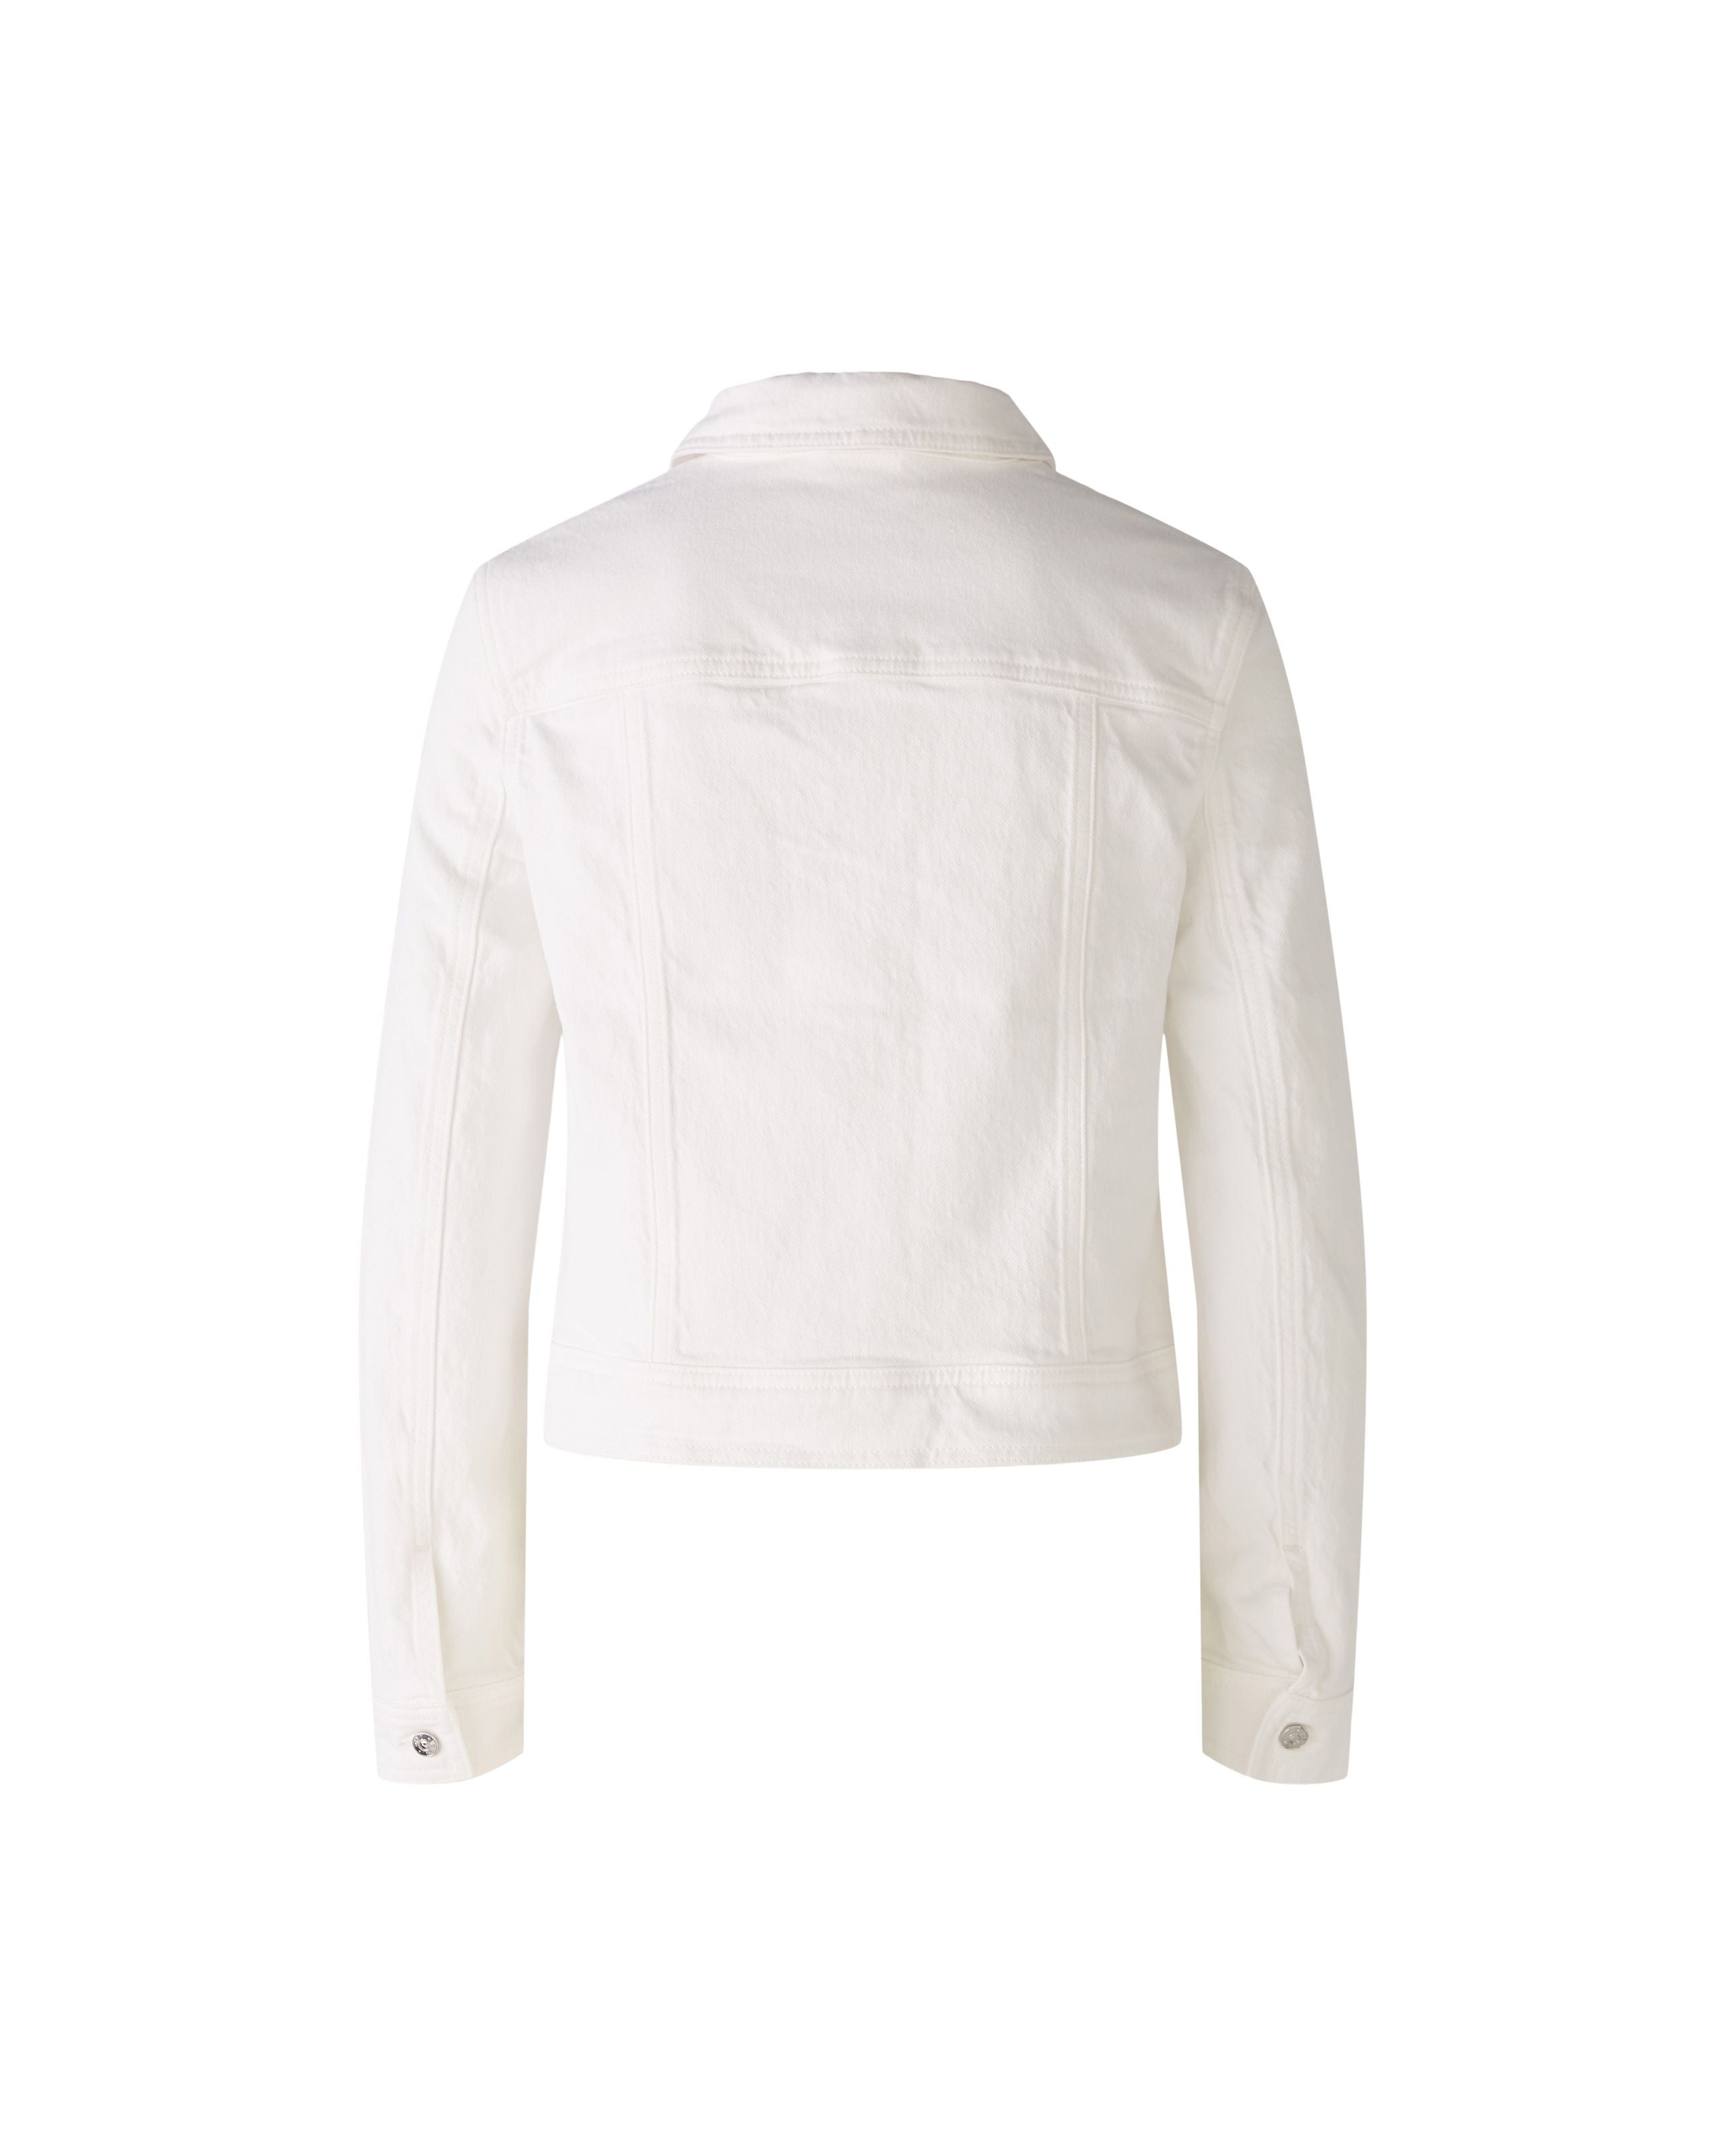 Oui White Embroidered Denim jacket From Back